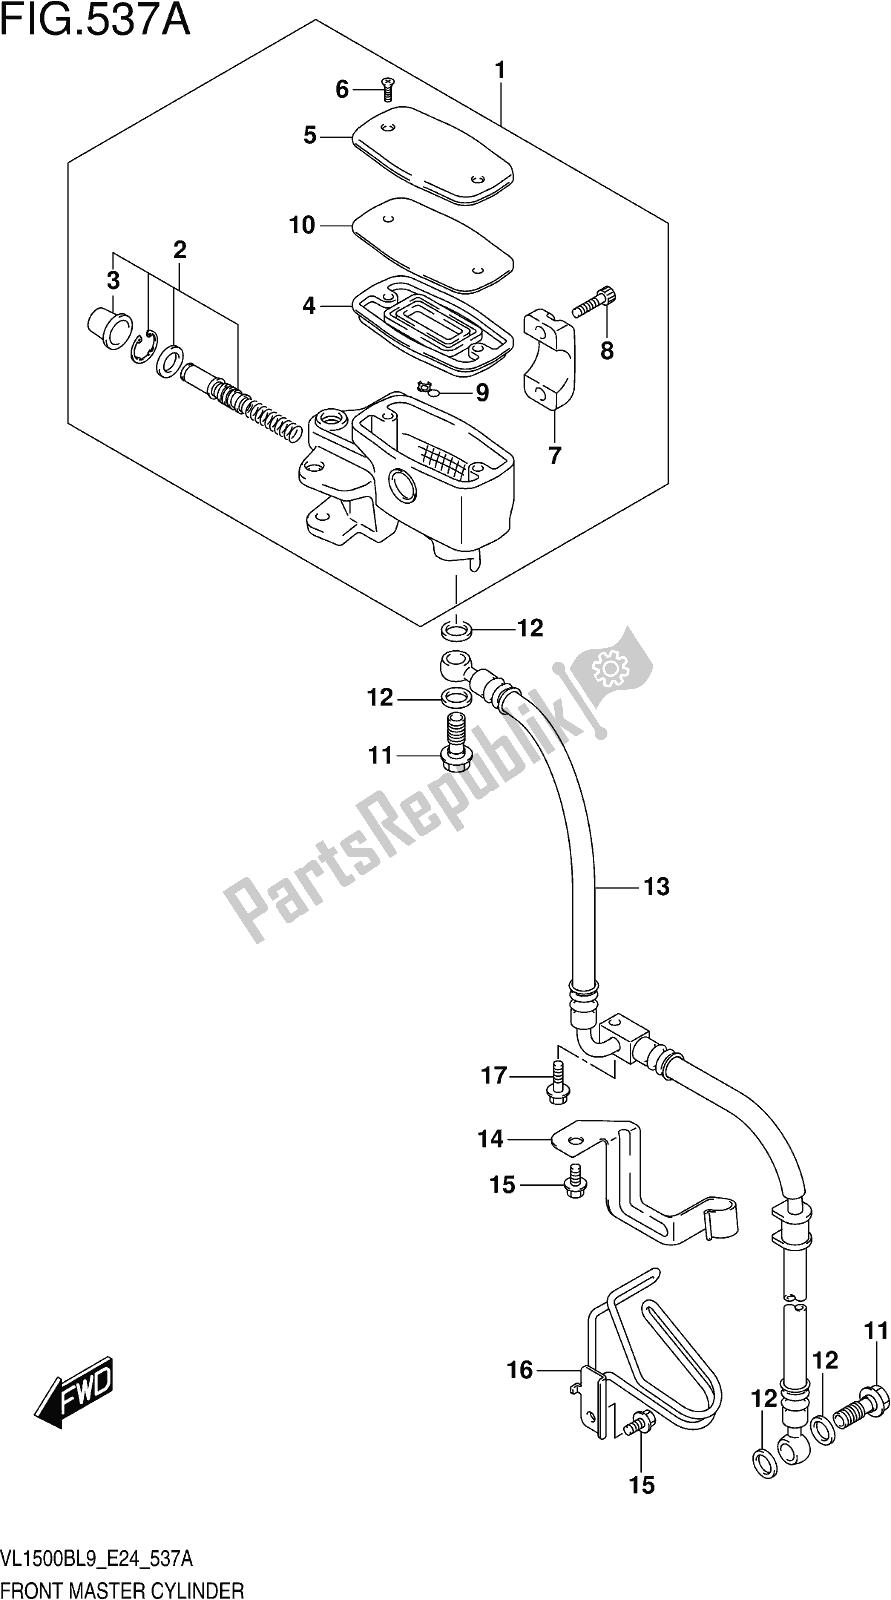 All parts for the Fig. 537a Front Master Cylinder of the Suzuki VL 1500B 2019